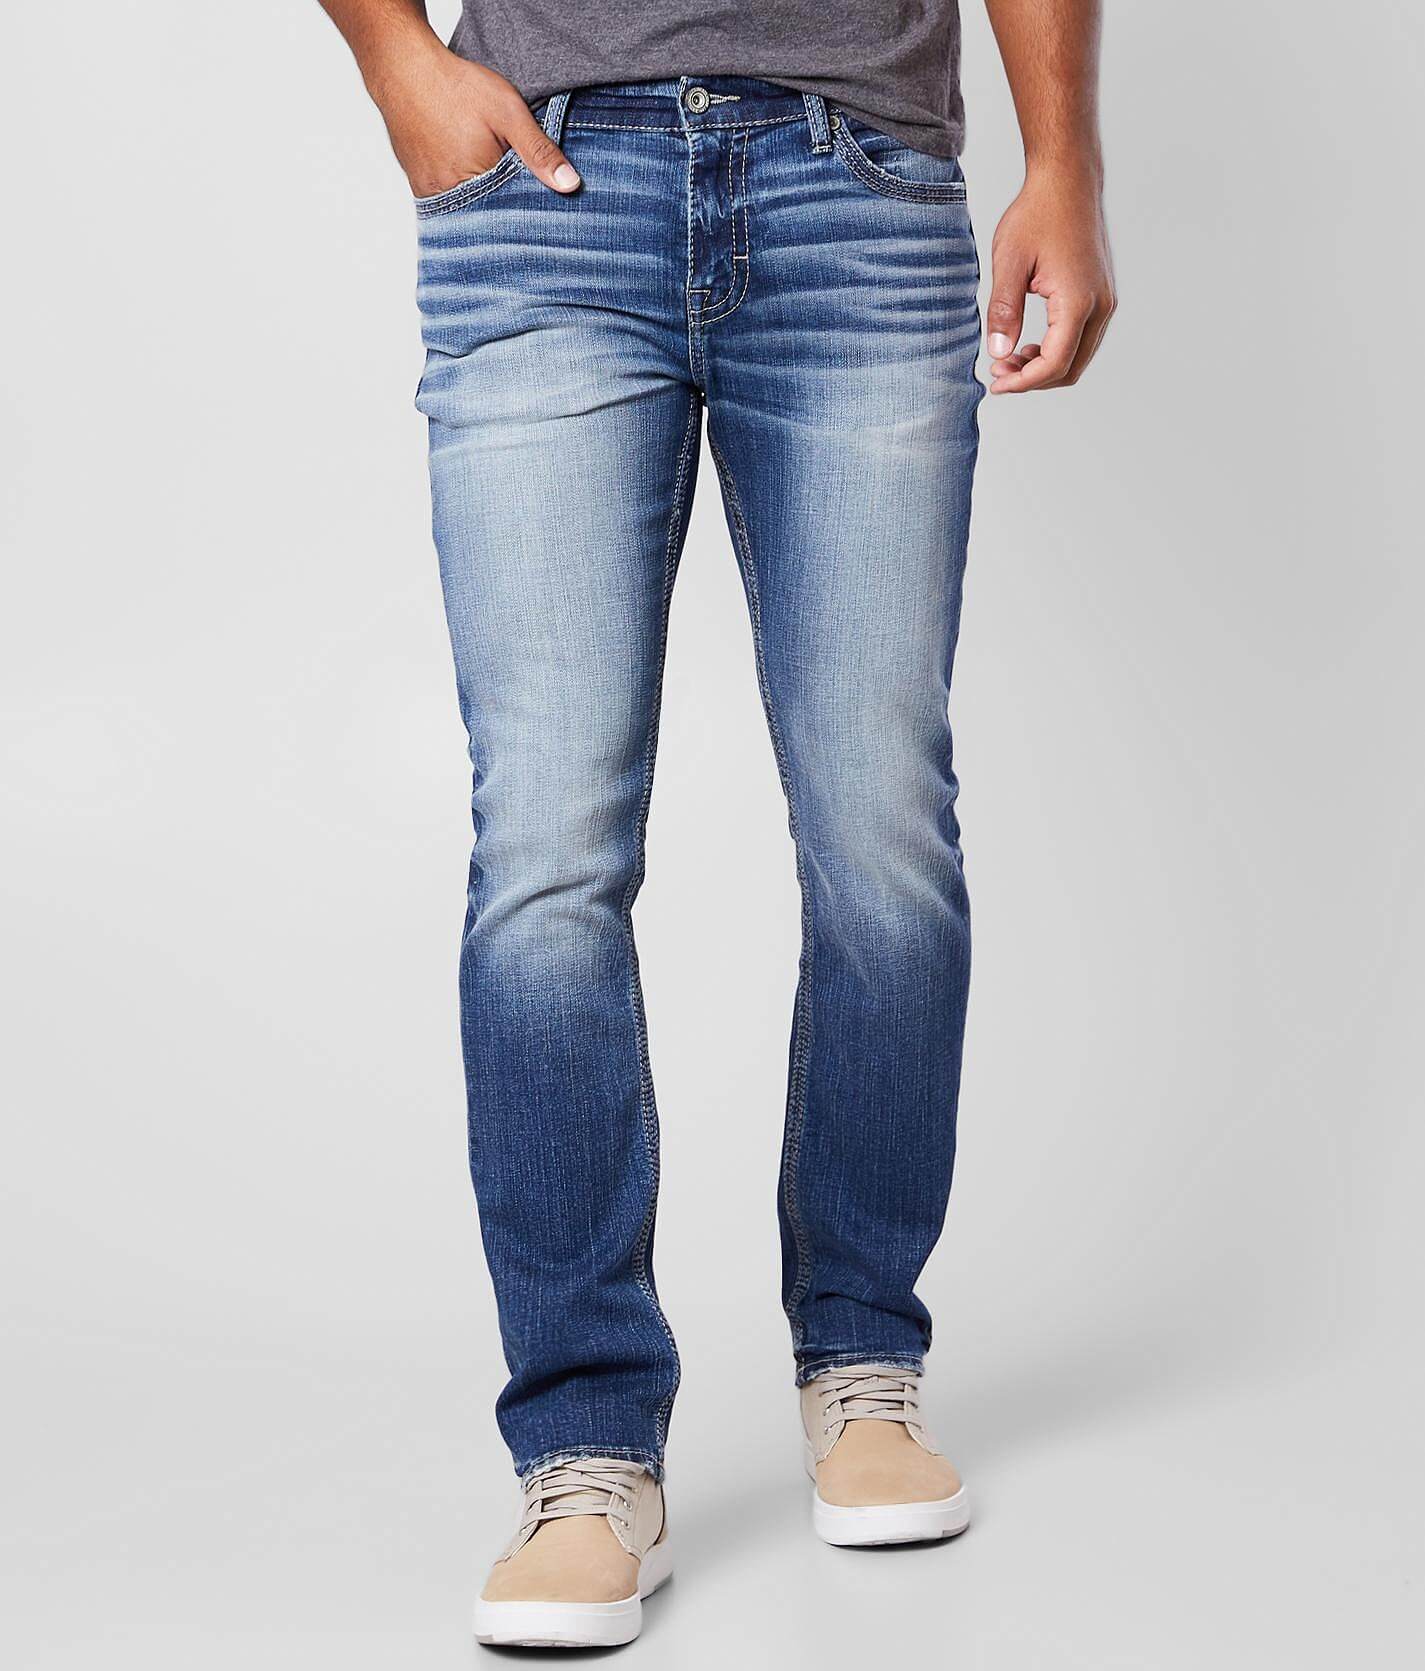 bke jeans canada